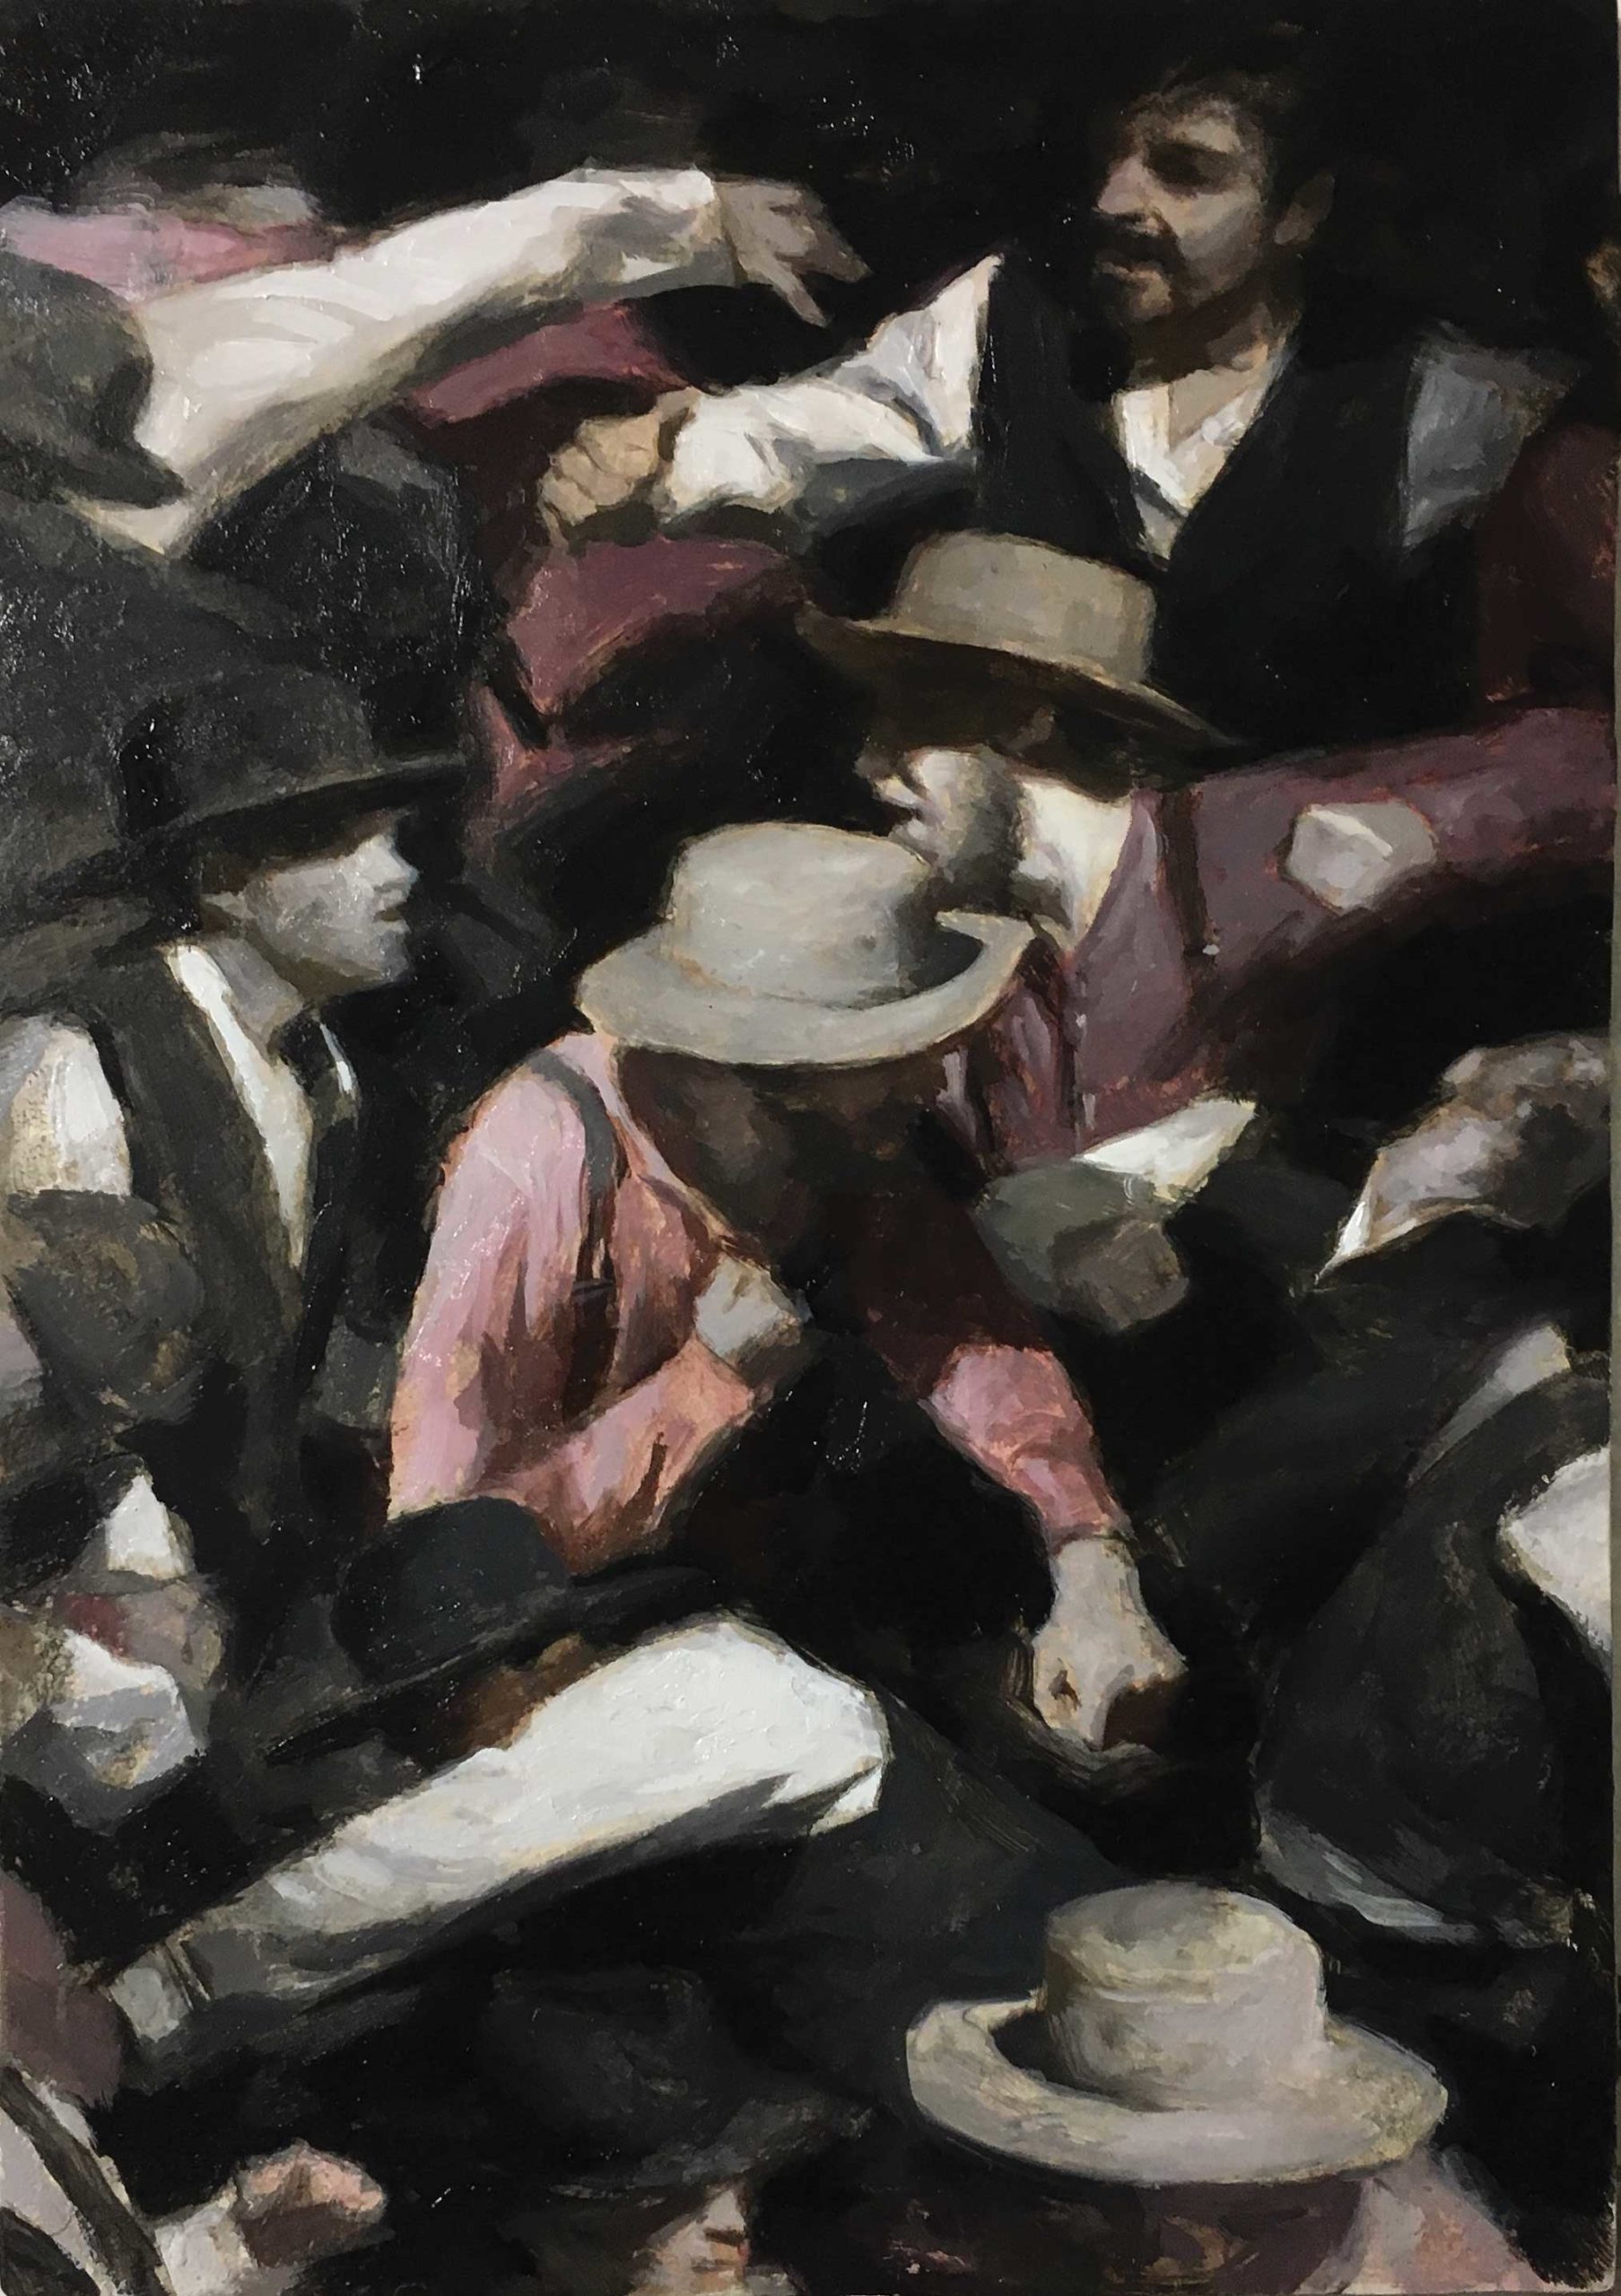 Sean Cheetham, "Saloon Brawl Study," 2018, oil on Dibond, 7 x 5 in., private collection